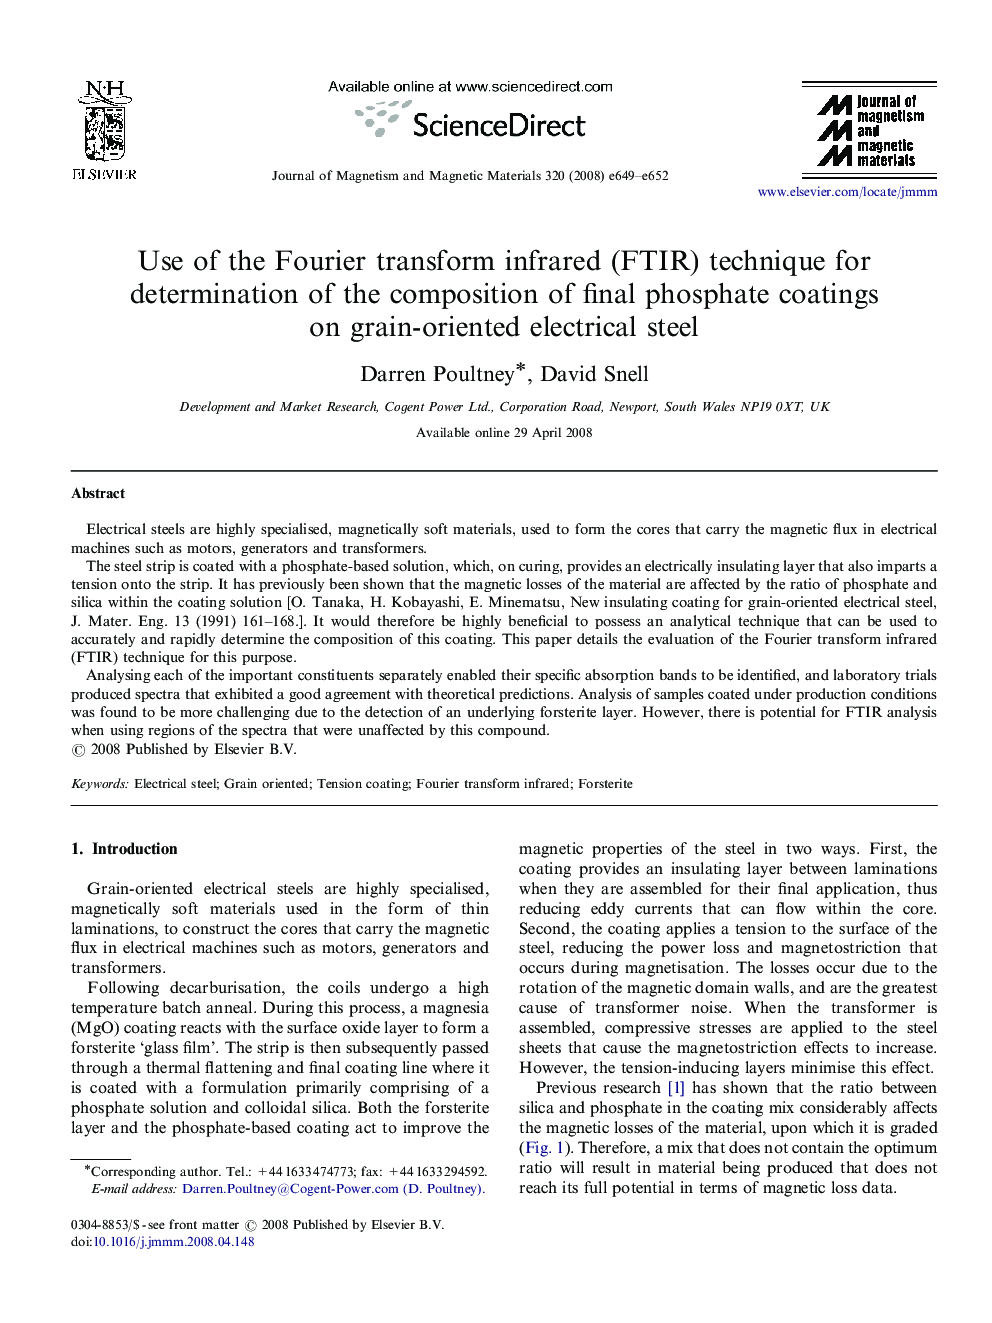 Use of the Fourier transform infrared (FTIR) technique for determination of the composition of final phosphate coatings on grain-oriented electrical steel